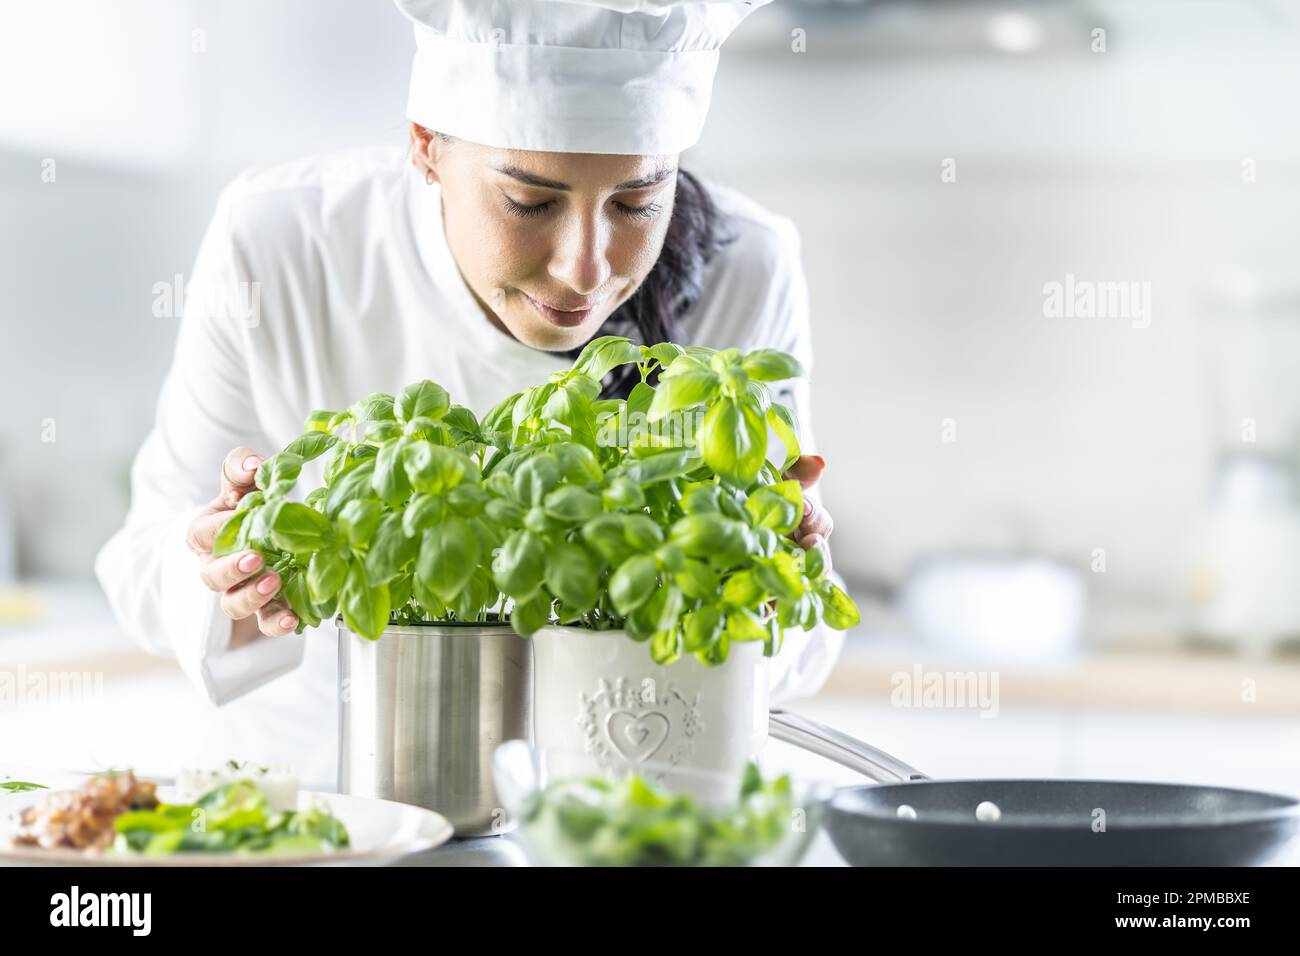 Professional female chef in white hat closes her eyes as she smells fresh basil in pots in front of her. Stock Photo